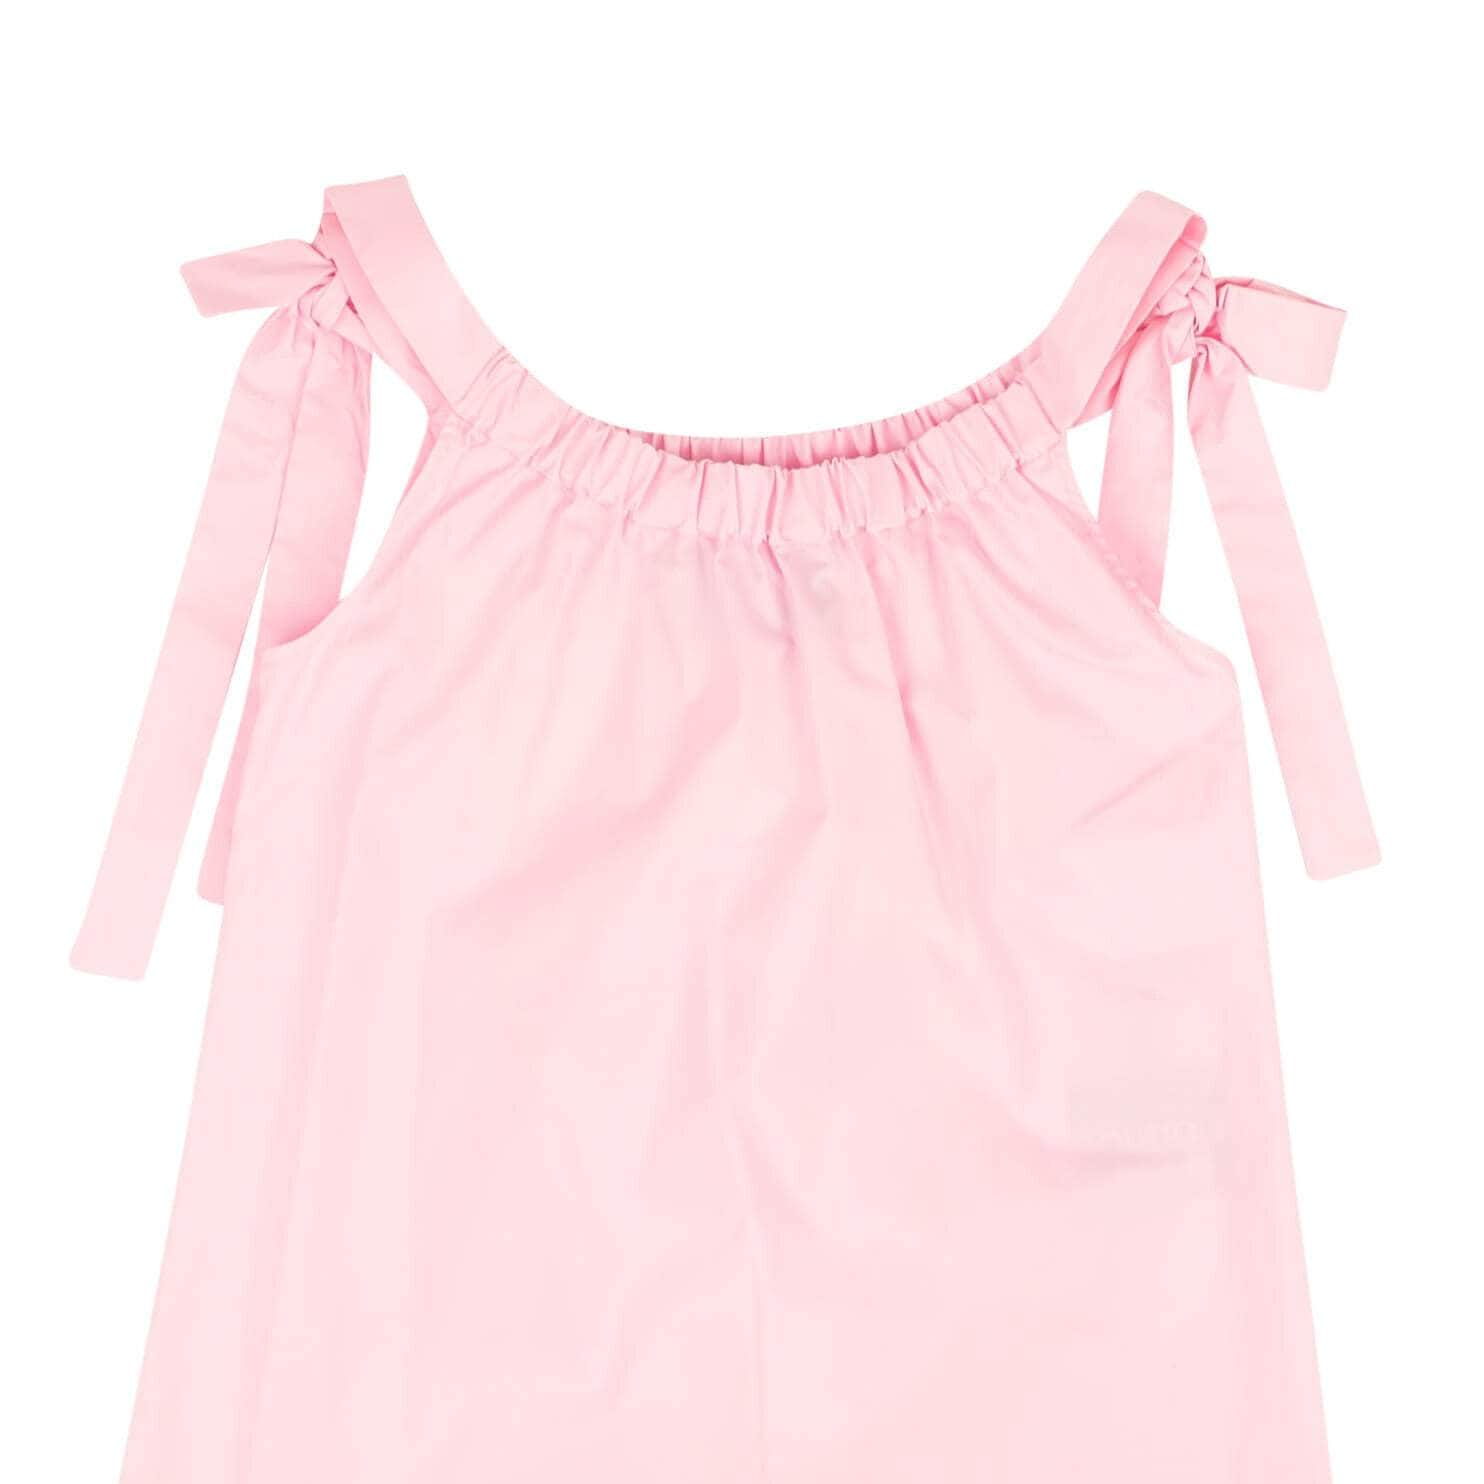 BOUTIQUE MOSCHINO boutique-moschino, channelenable-all, chicmi, couponcollection, gender-womens, main-clothing, size-36, size-38, size-40, size-42, under-250, womens-blouses Pink Summer Woman Tie Strap Sleeveless Top